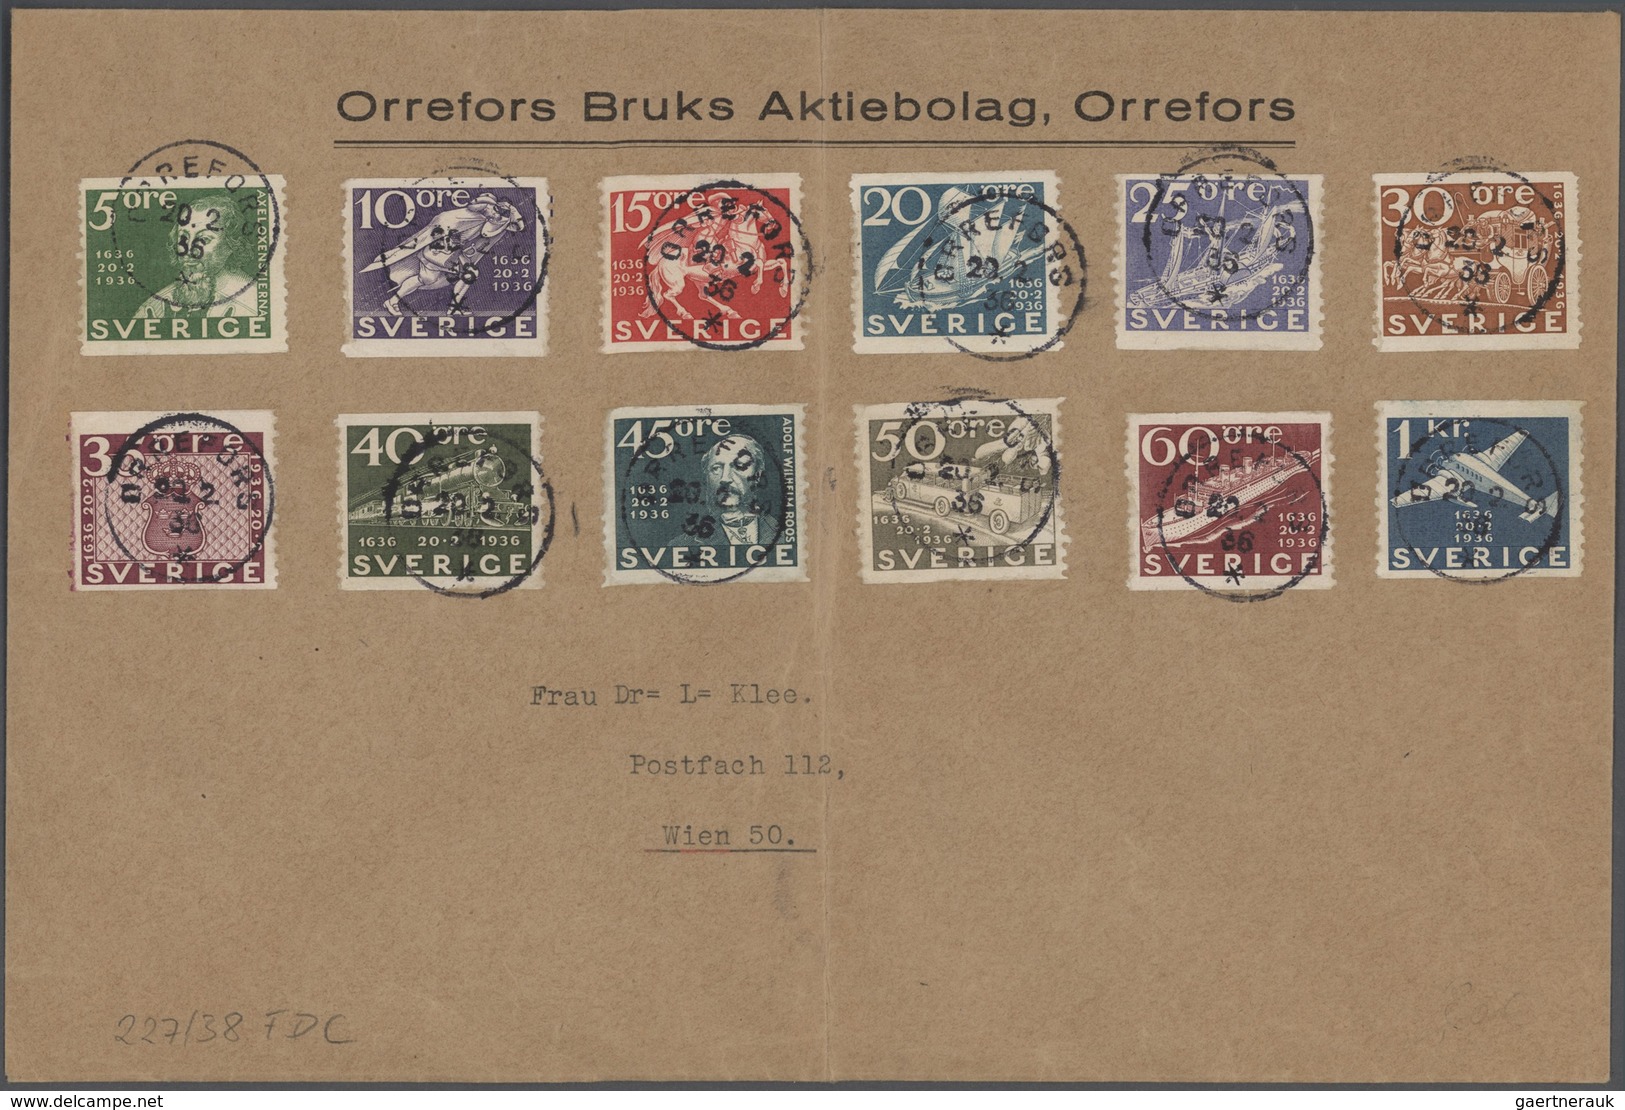 Schweden: 1722/1960, interesting lot of ca. 55 better covers and 9 regulations for post offices (172